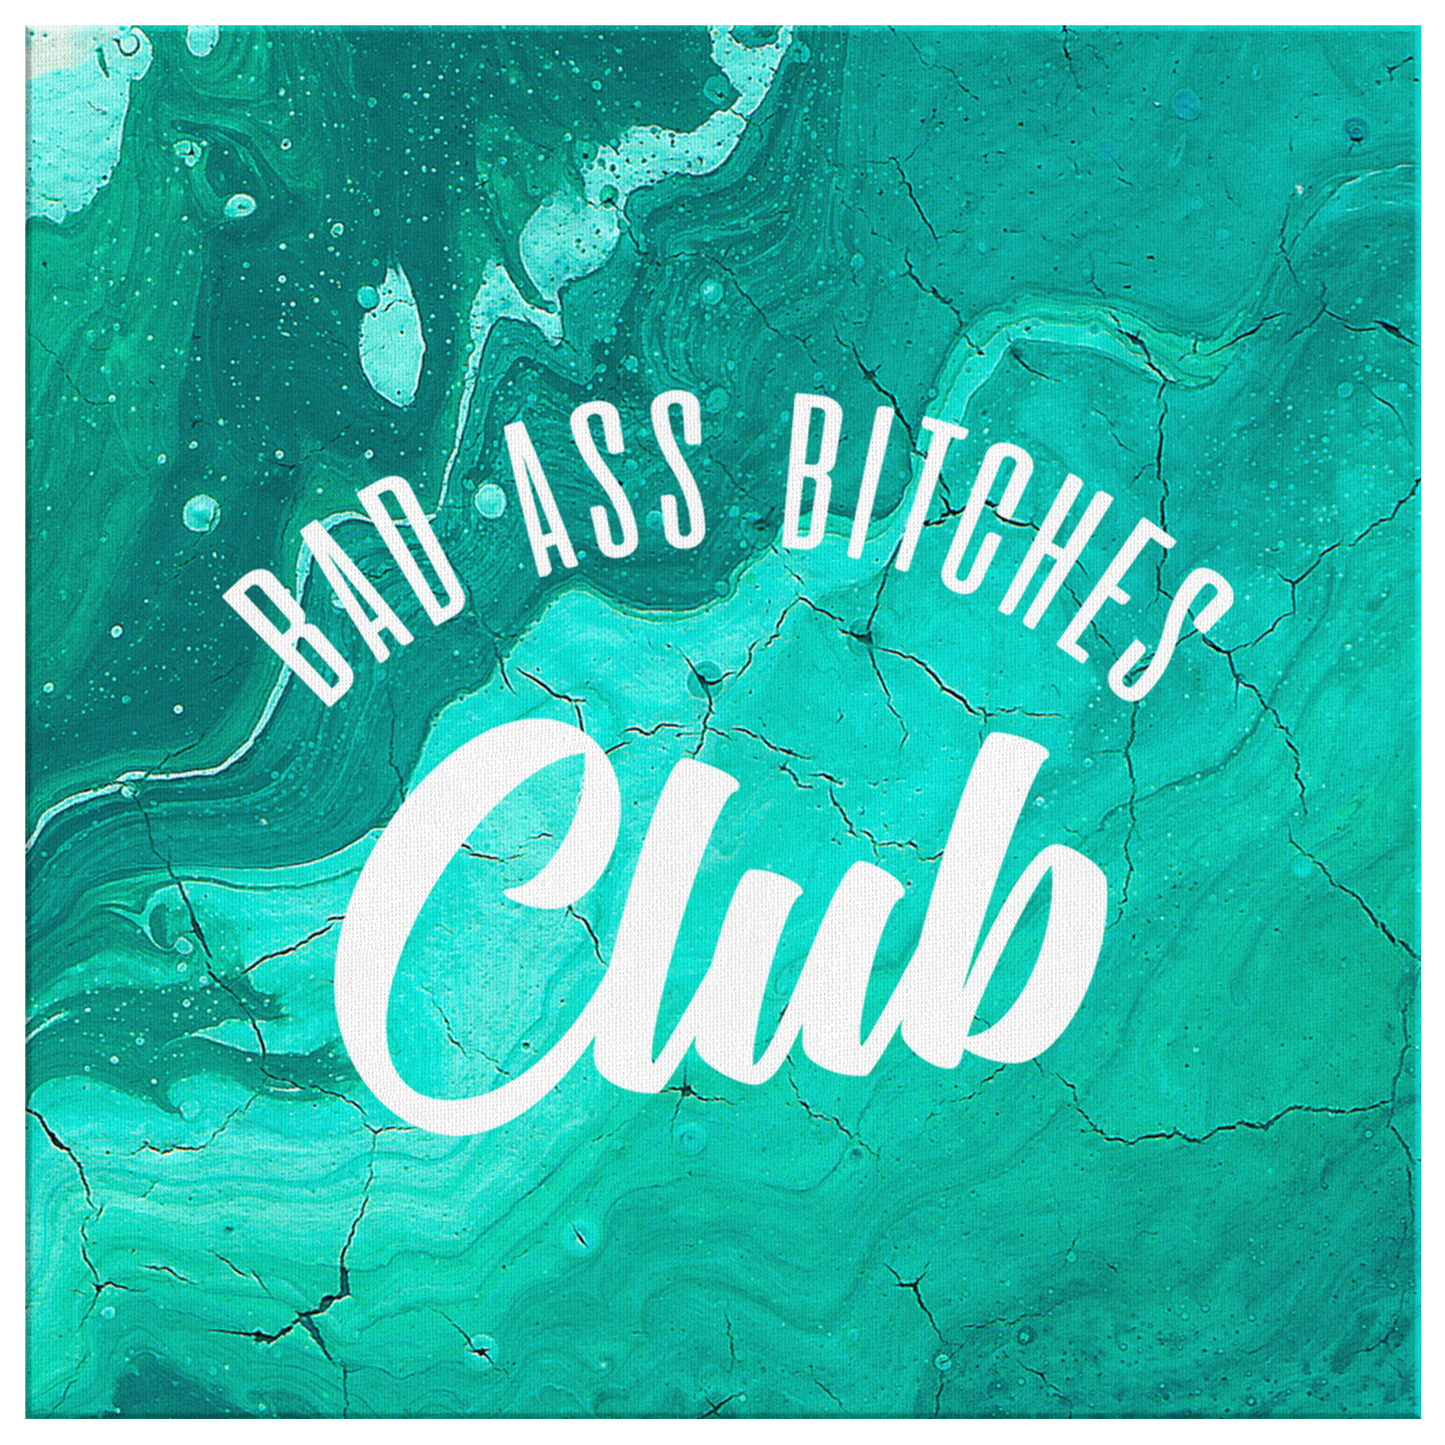 BAD ASS BITCHES CLUB GALLERY CANVAS WALL ART